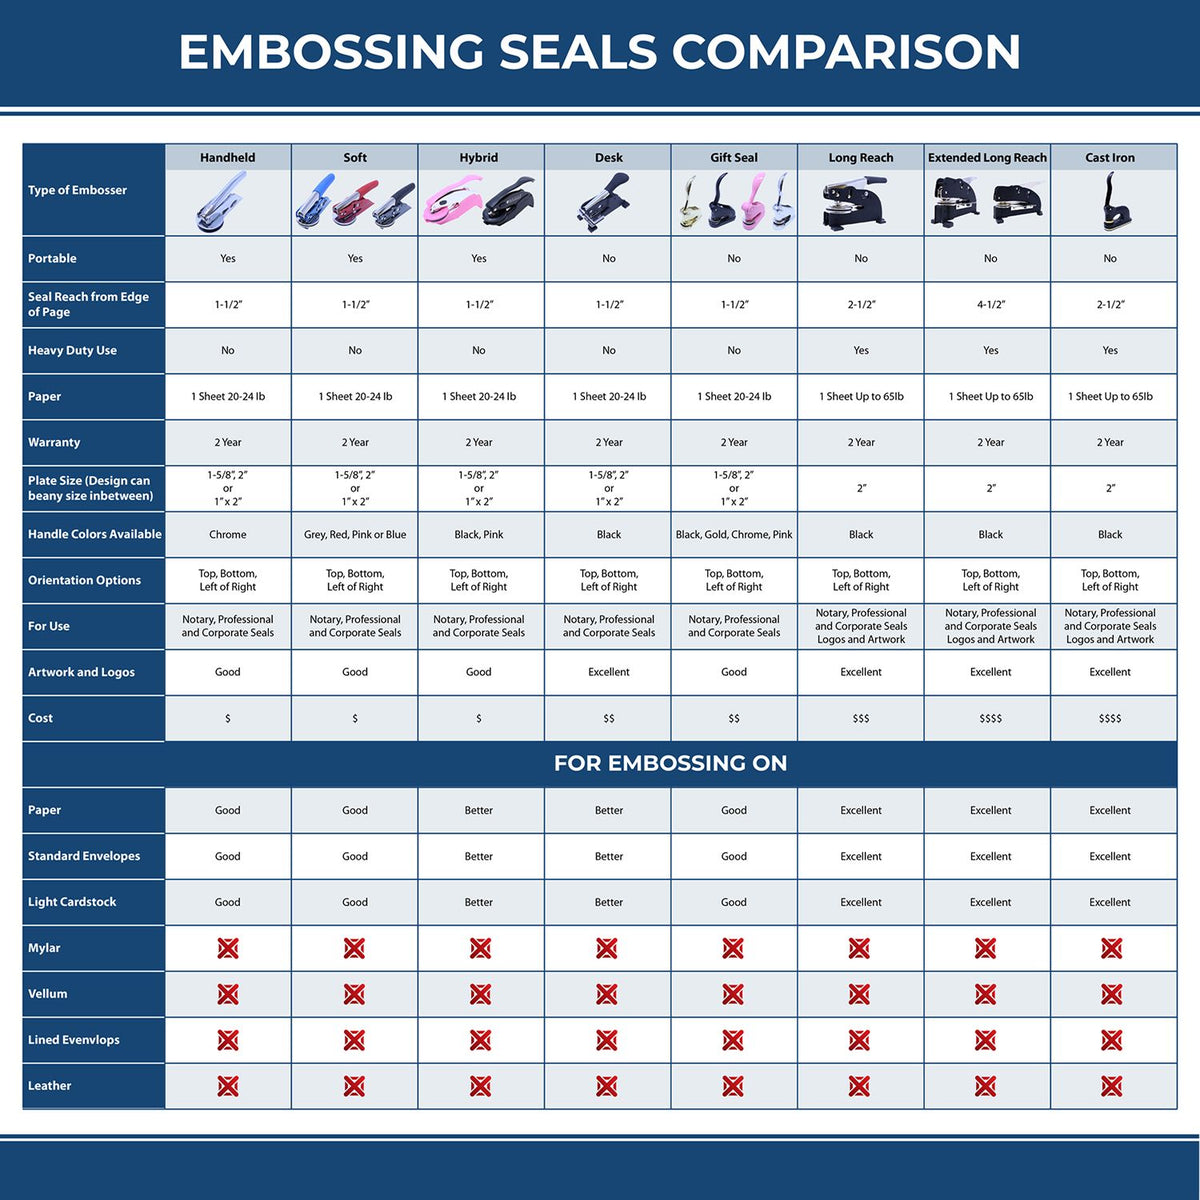 A comparison chart for the different types of mount models available for the Soft Pocket Ohio Landscape Architect Embosser.